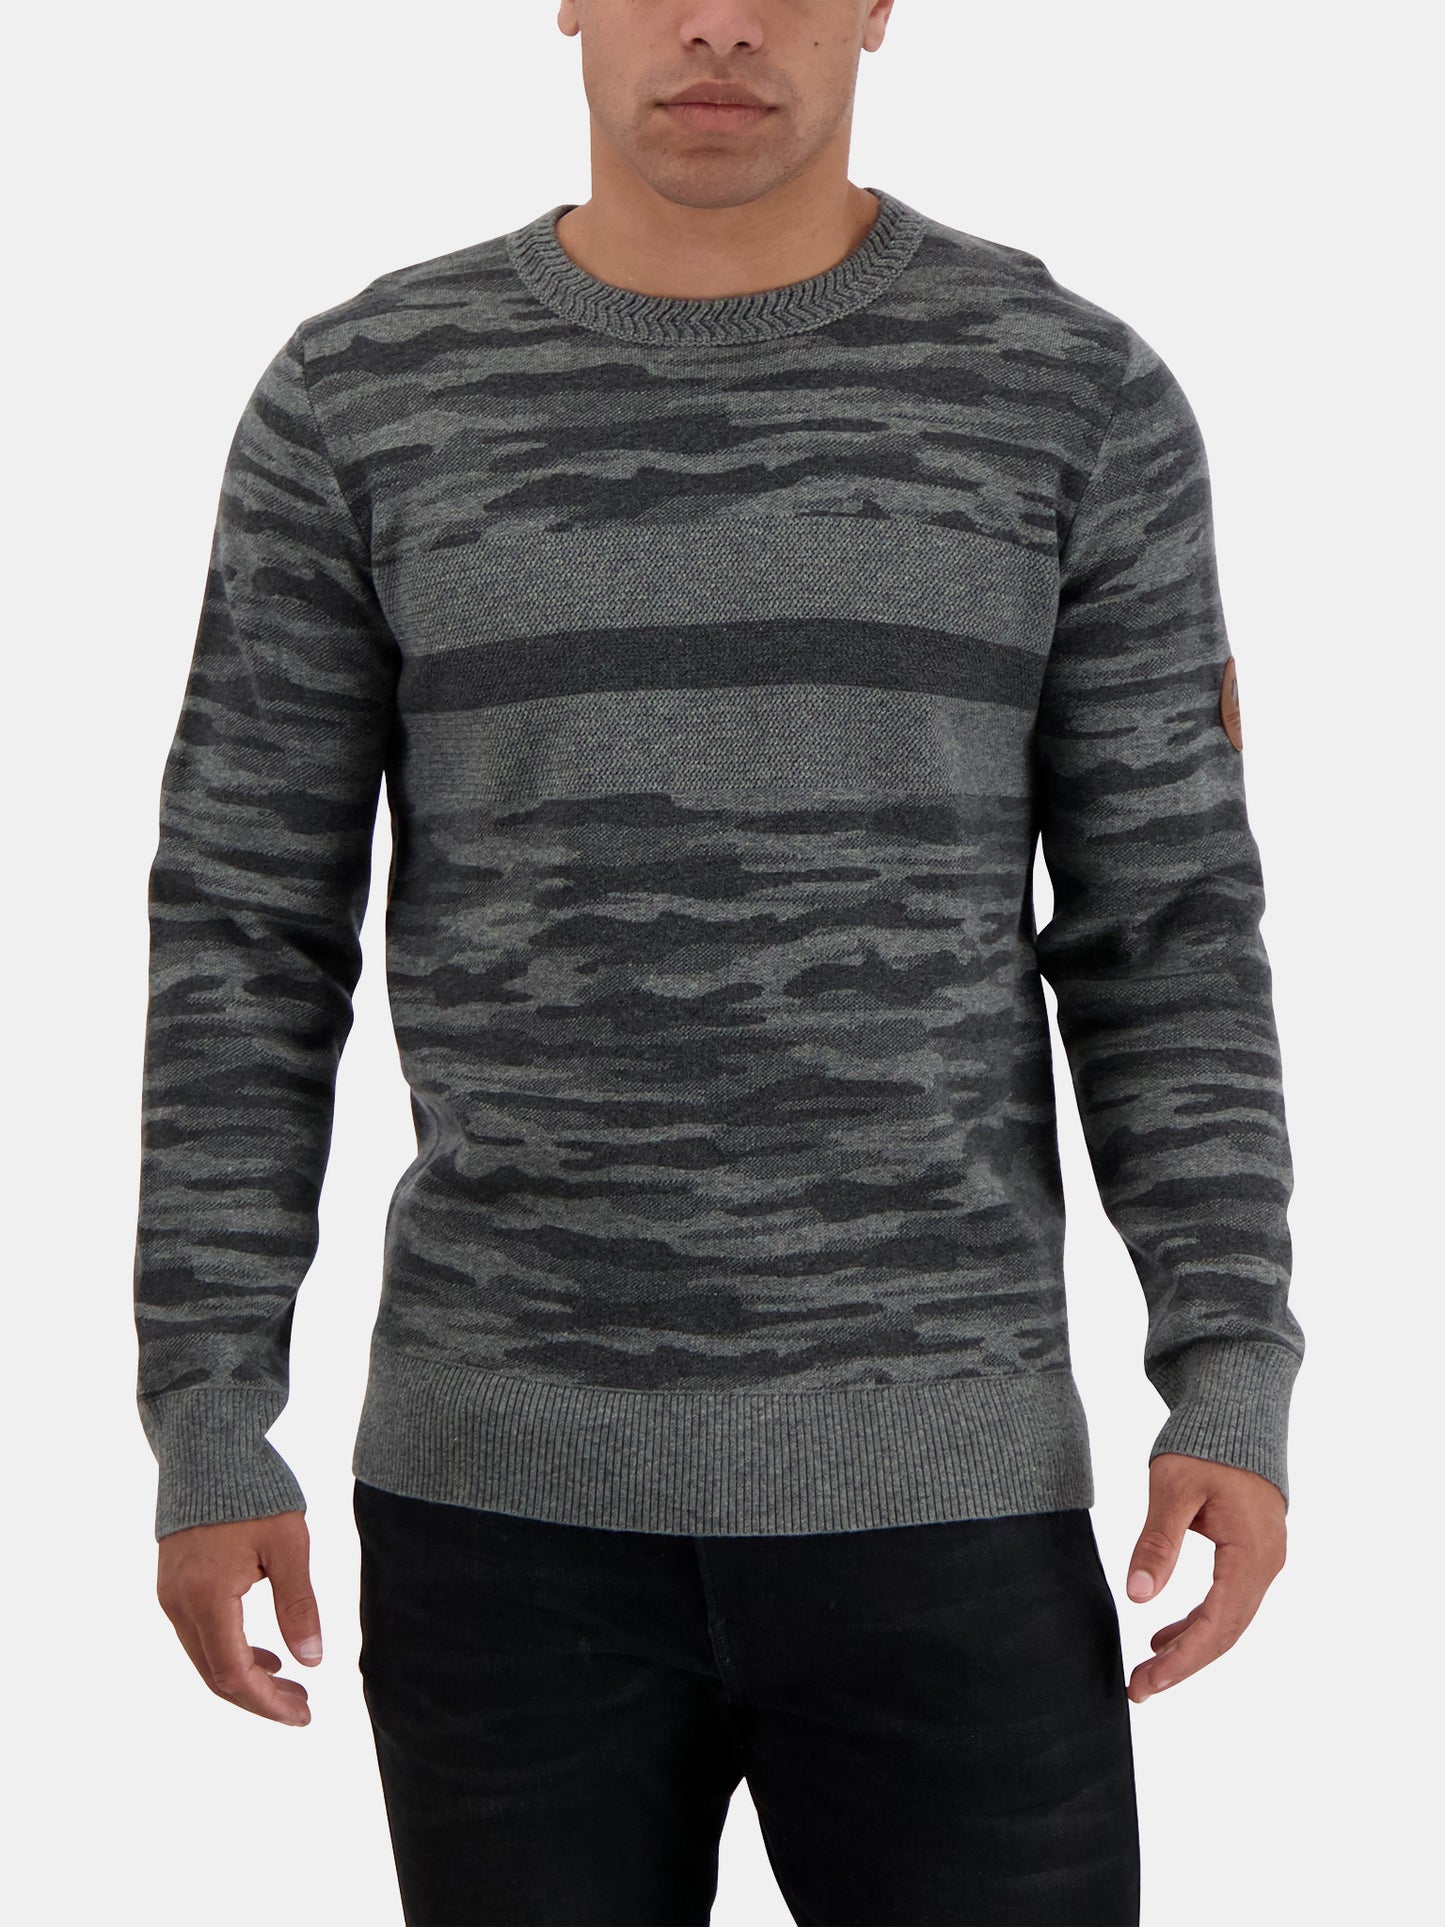 Obermeyer Men's Chase Camo Sweater